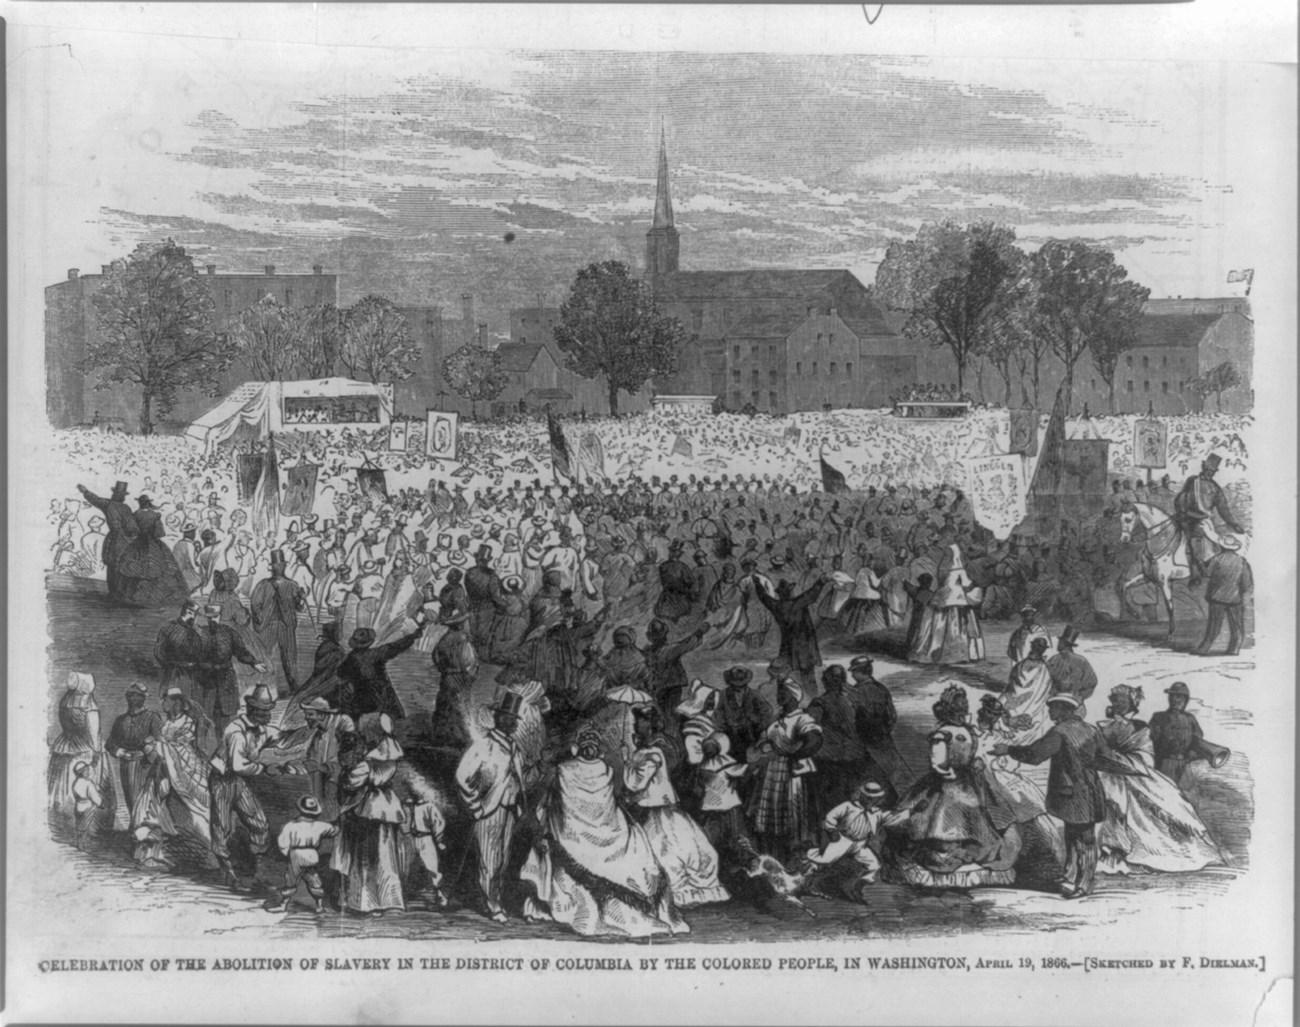 A black and white sketch of a crowd of people celebrating DC Emancipation Day in a city square. The crowd is full of men, women, and children. Many of the people are wearing fancy suits or dresses, while others wear military uniforms. They carry flags and